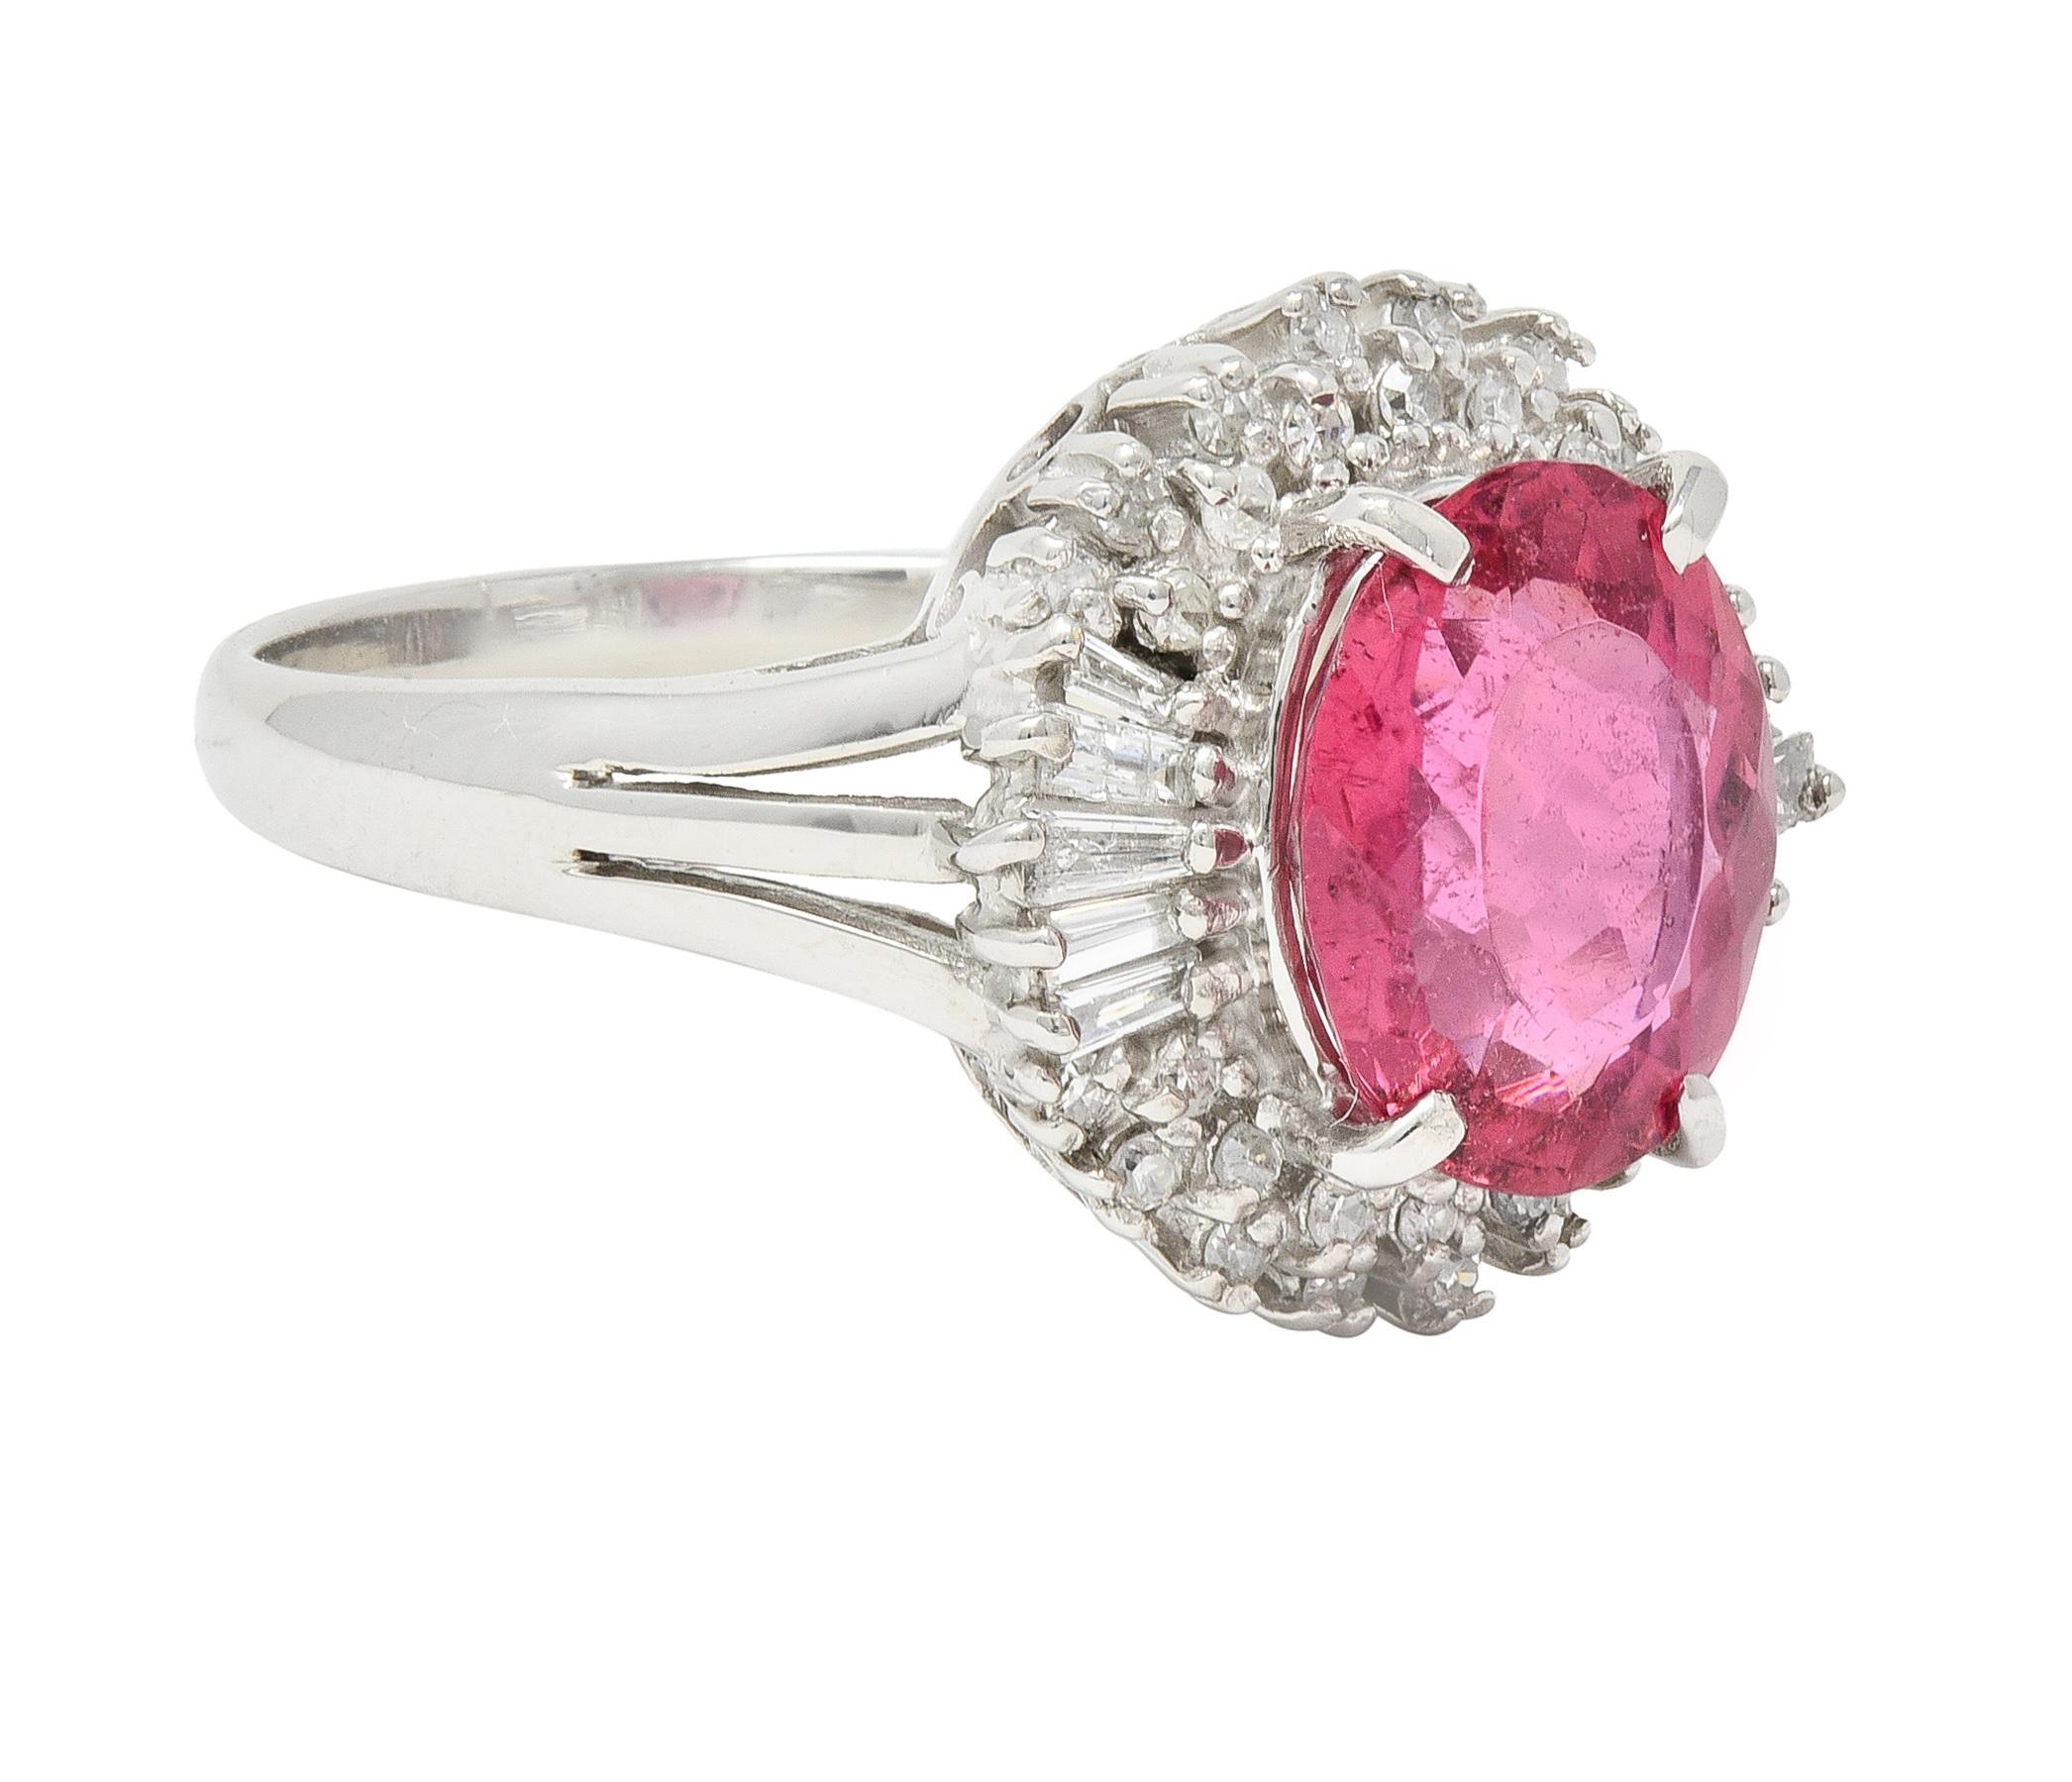 Centering an oval cut spinel weighing 2.50 carats - transparent medium orangy pink in color 
Prong set with a recessed halo surround comprised of single and baguette cut diamonds 
Weighing approximately 0.35 carat total - eye clean and